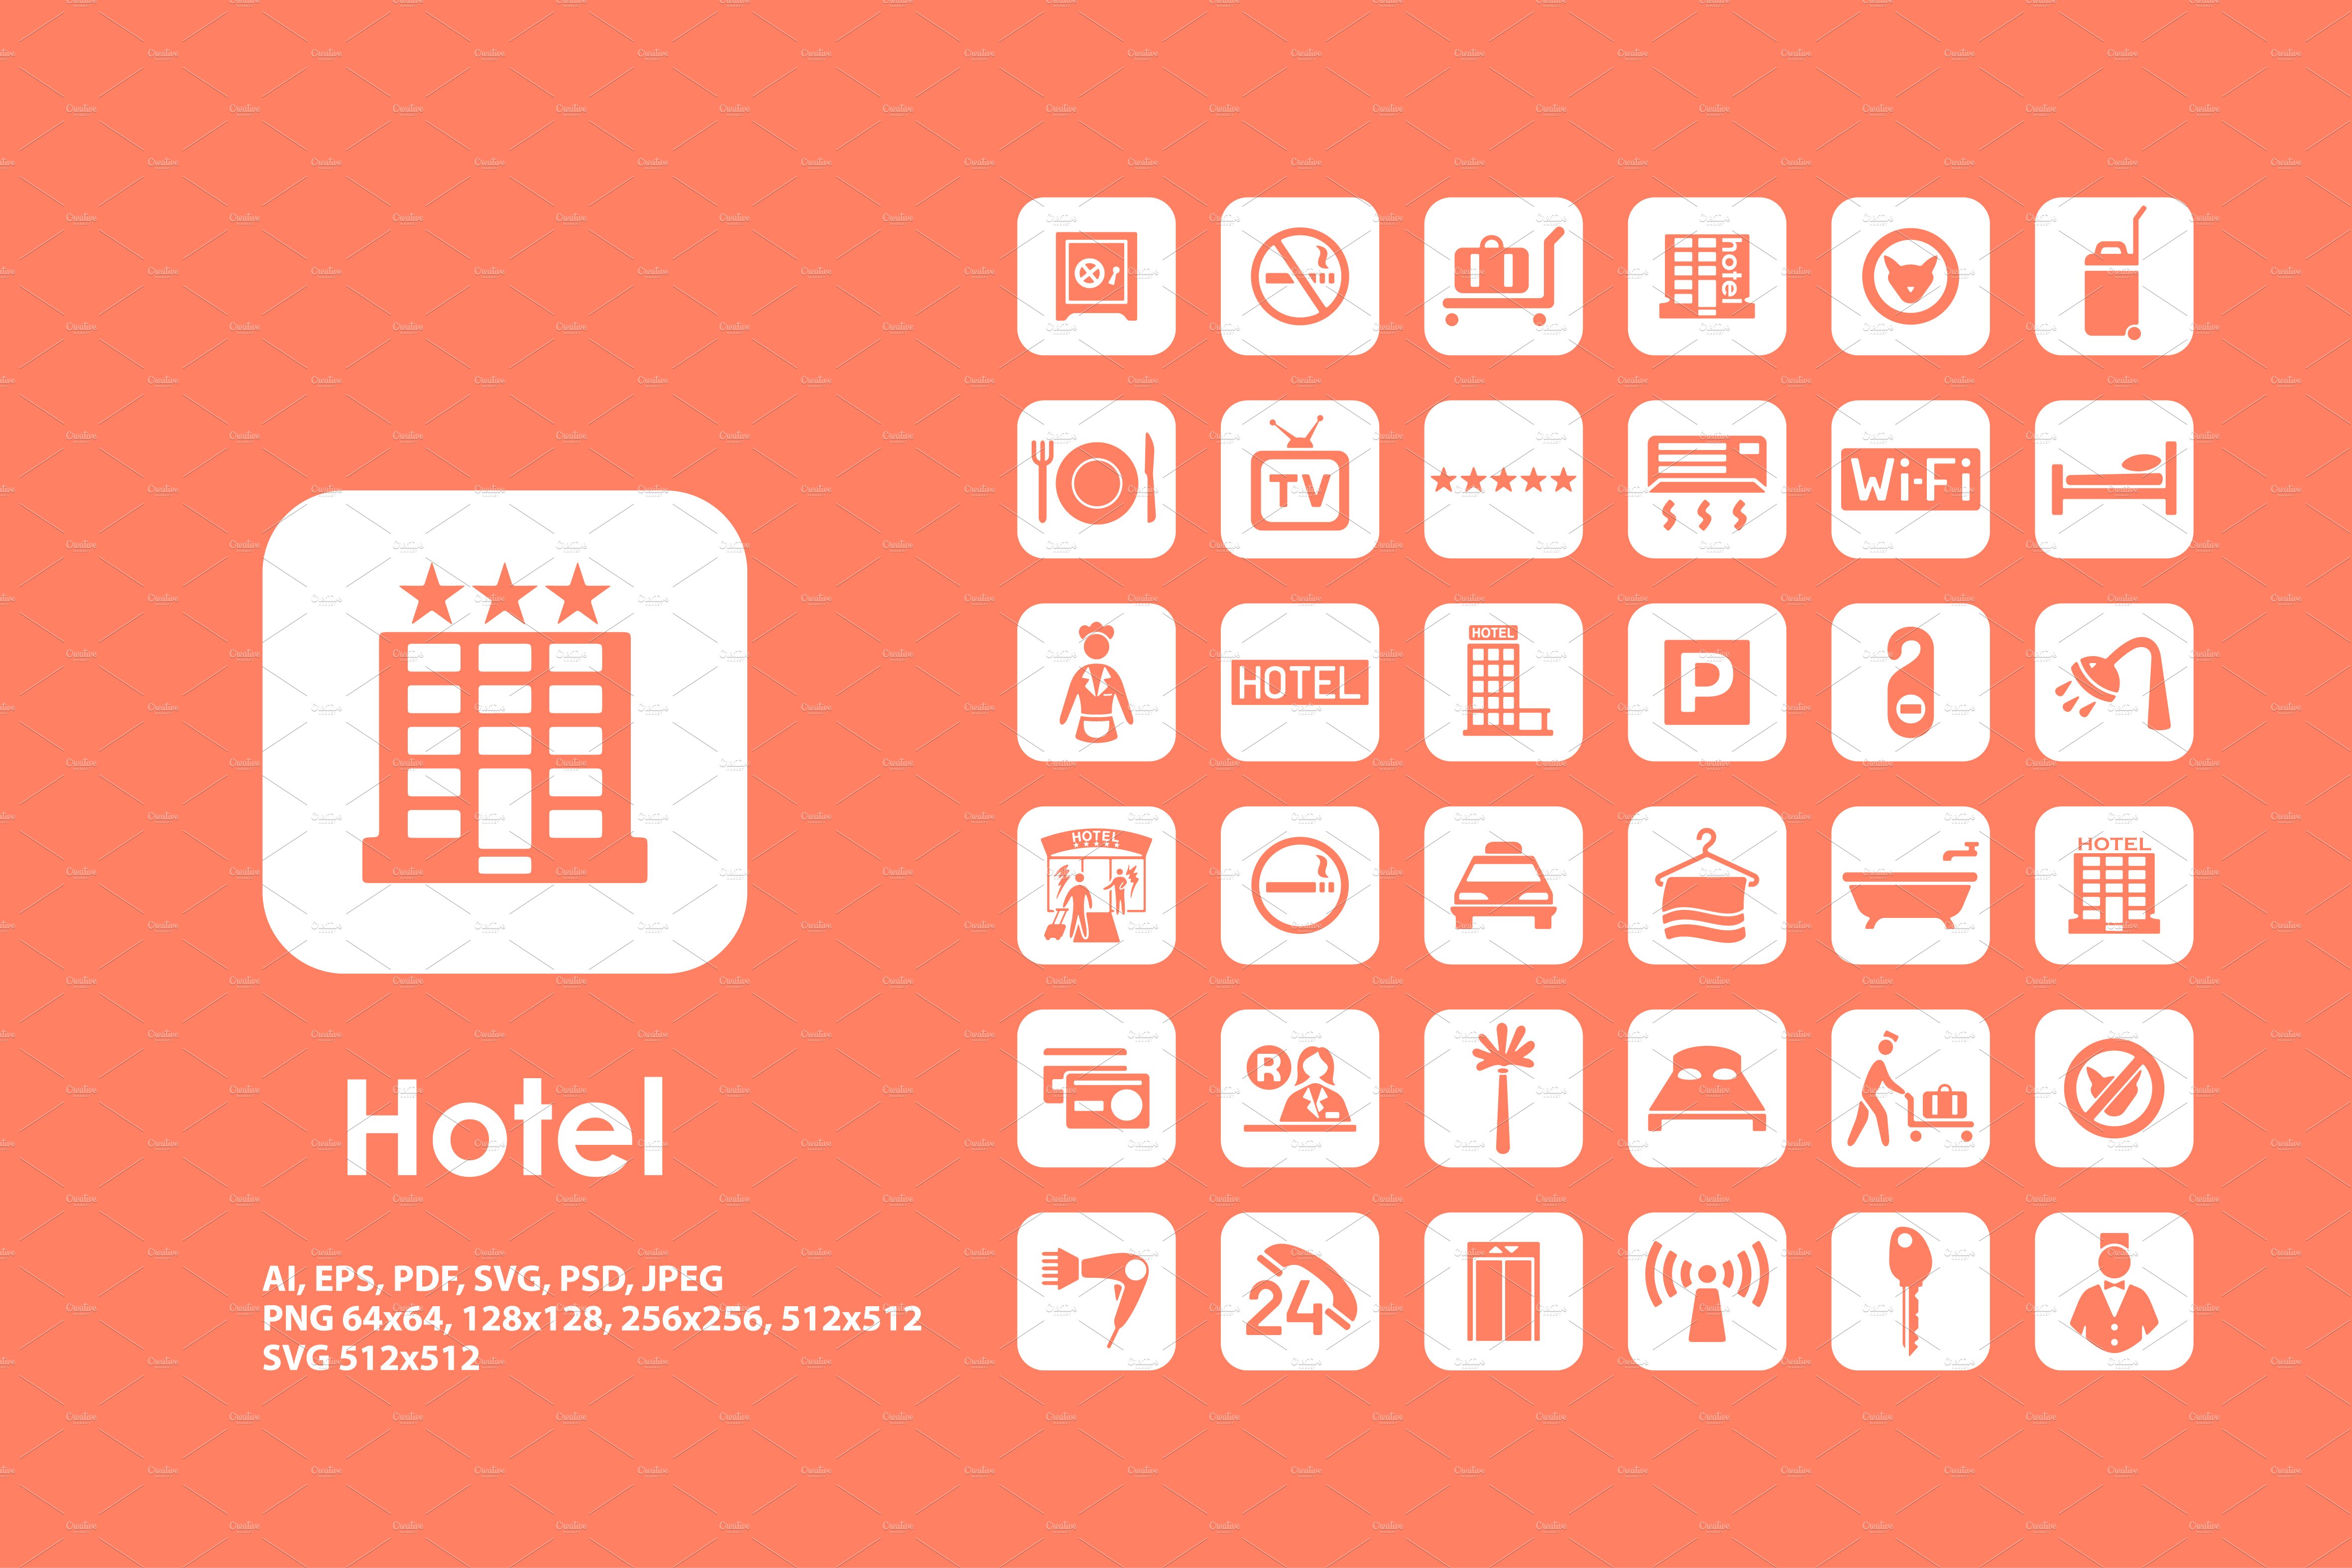 Hotel icons preview image.